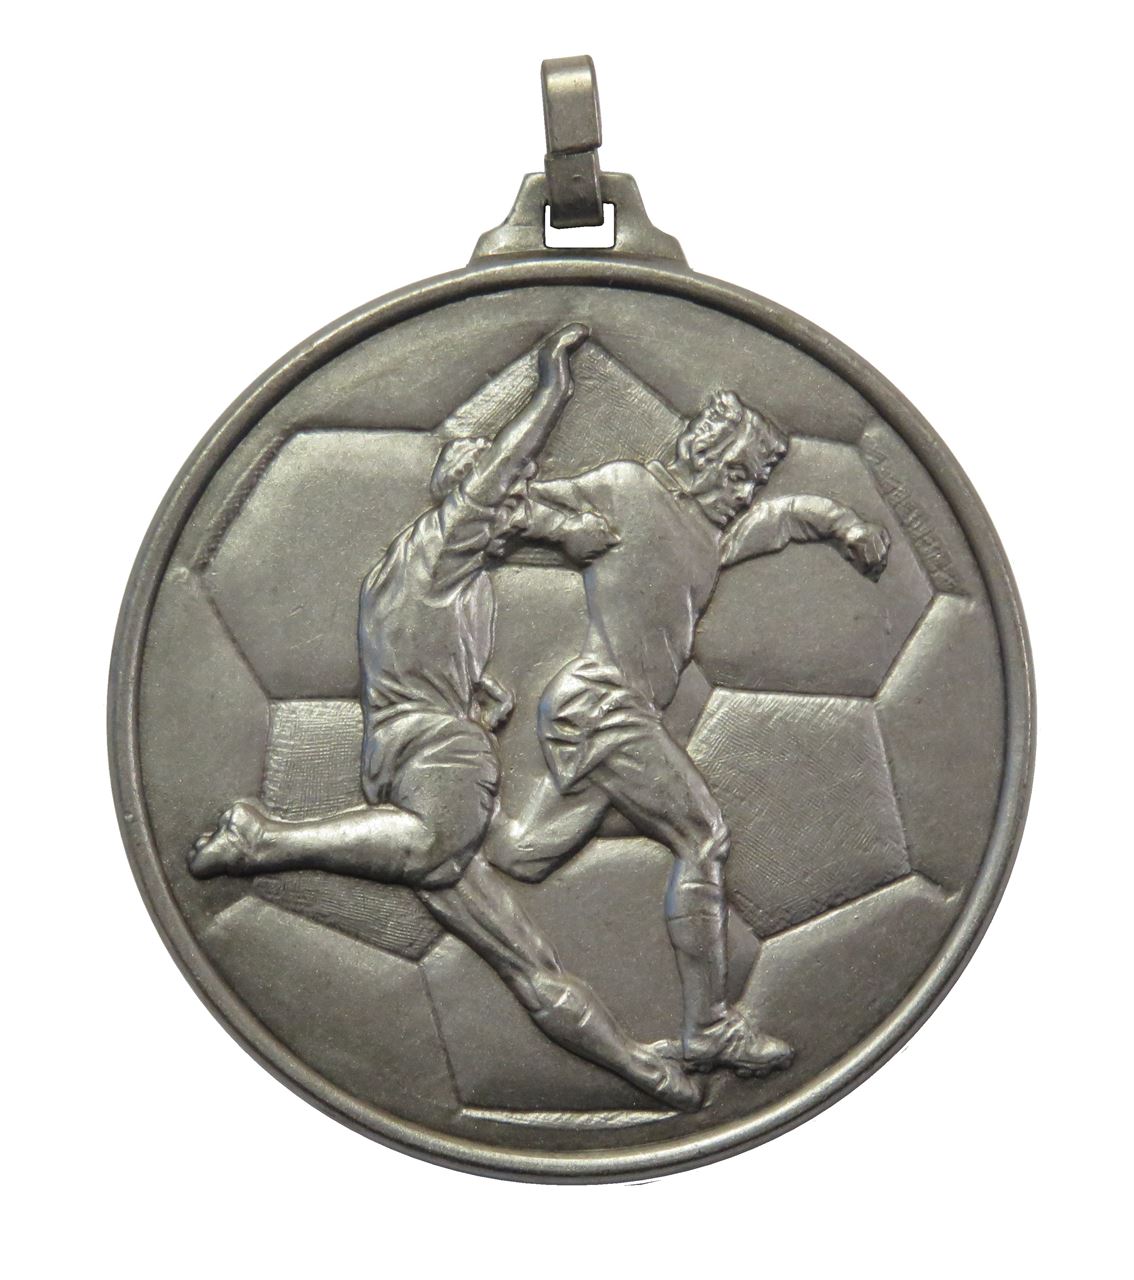 Silver Economy Football Medal (size: 52mm) - 176E